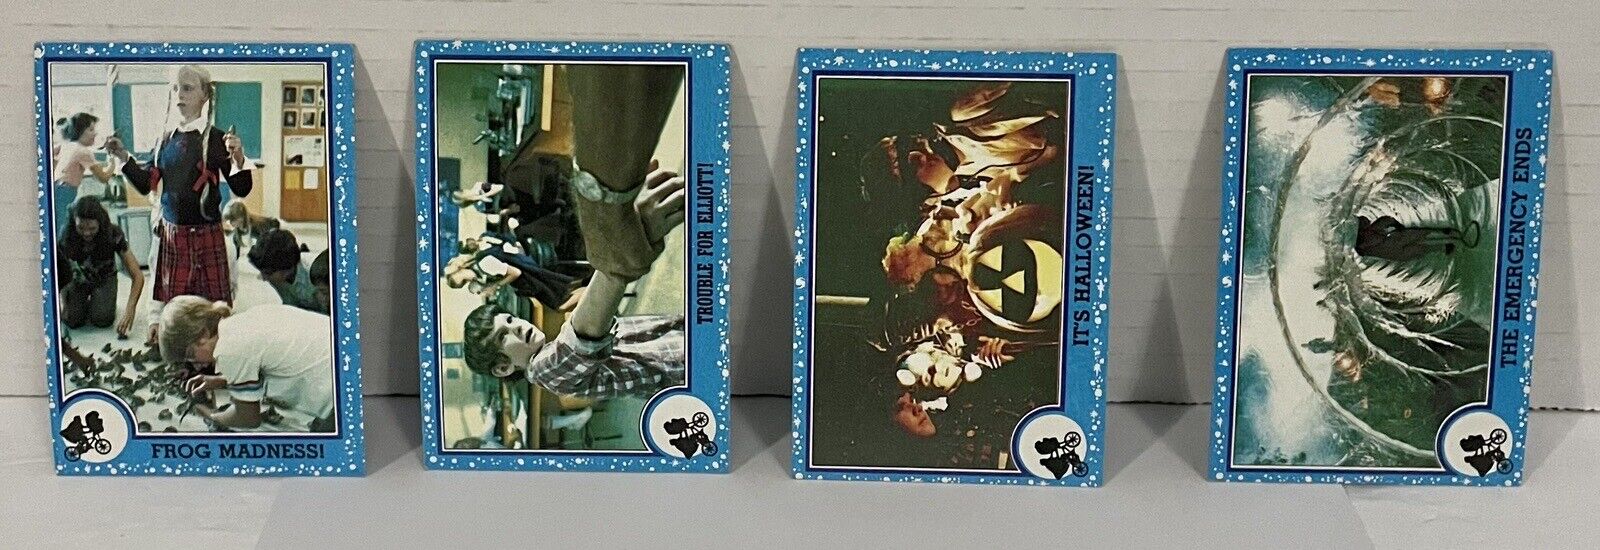 1982 Topps ET The Extra Terrestrial Movie Trading Cards Lot Of 4 # 31,33,41 & 58